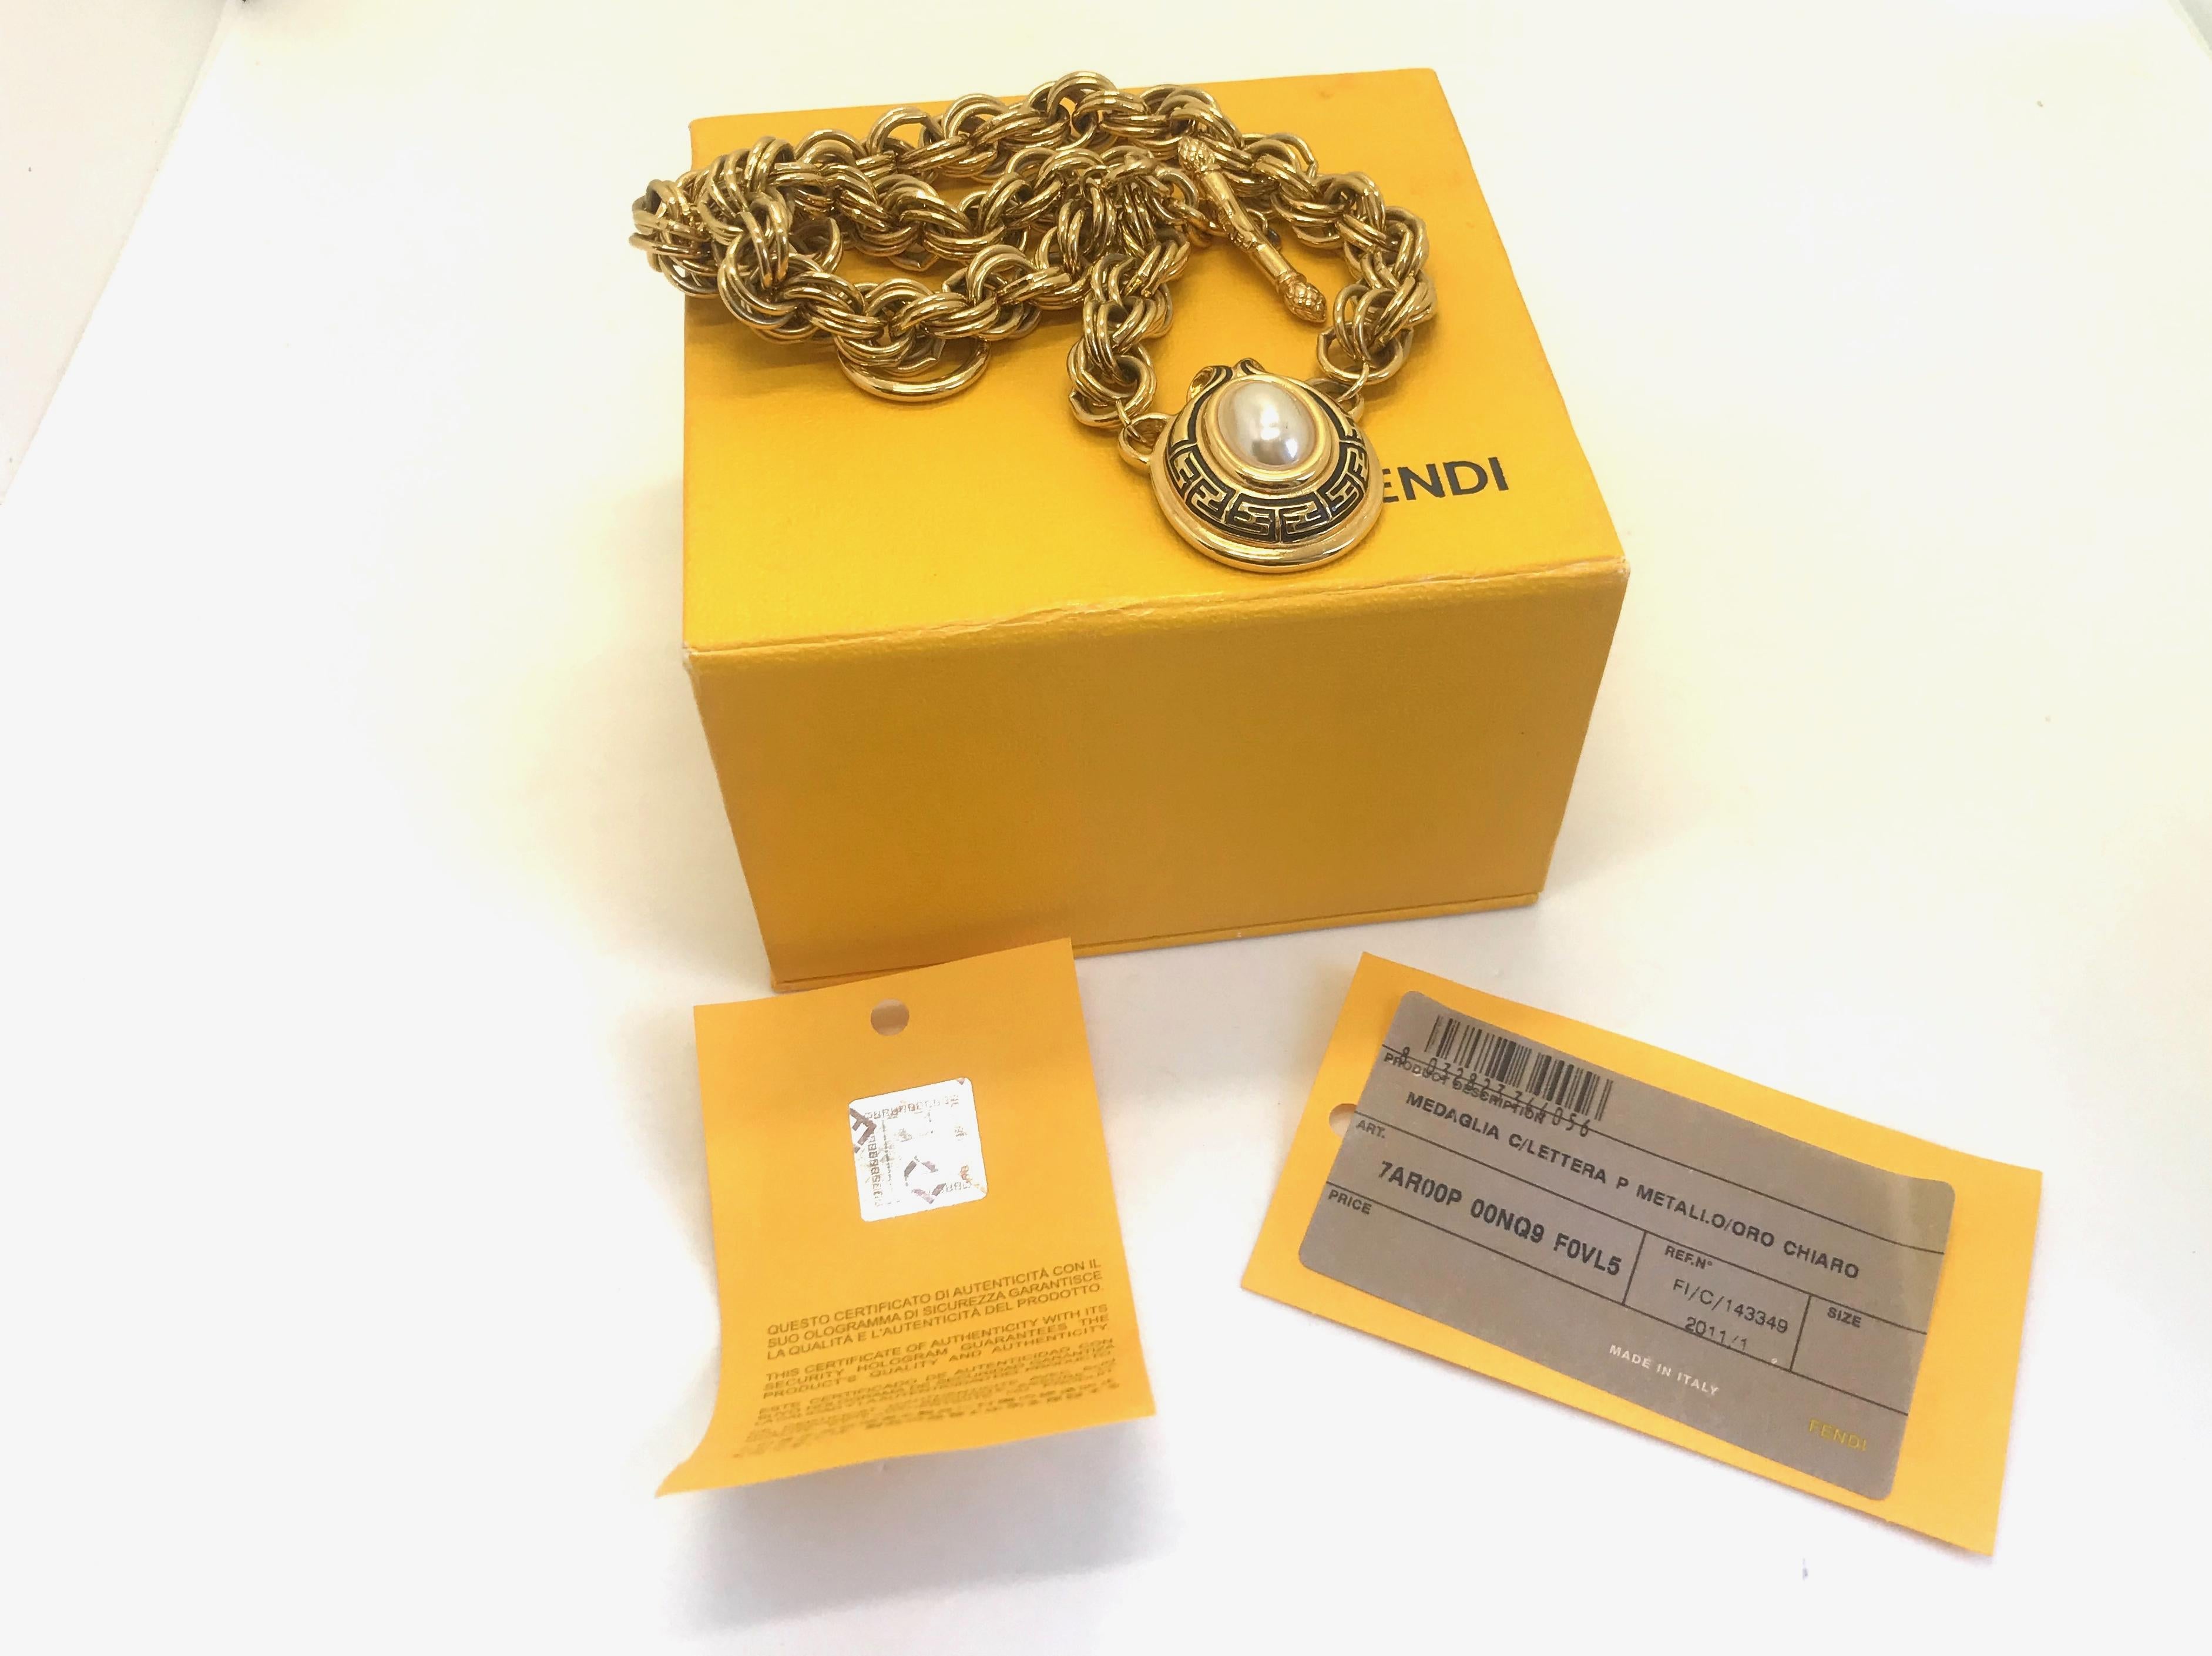 Fendi Statement Pendant Necklace.

Comes with original box and authenticity card.